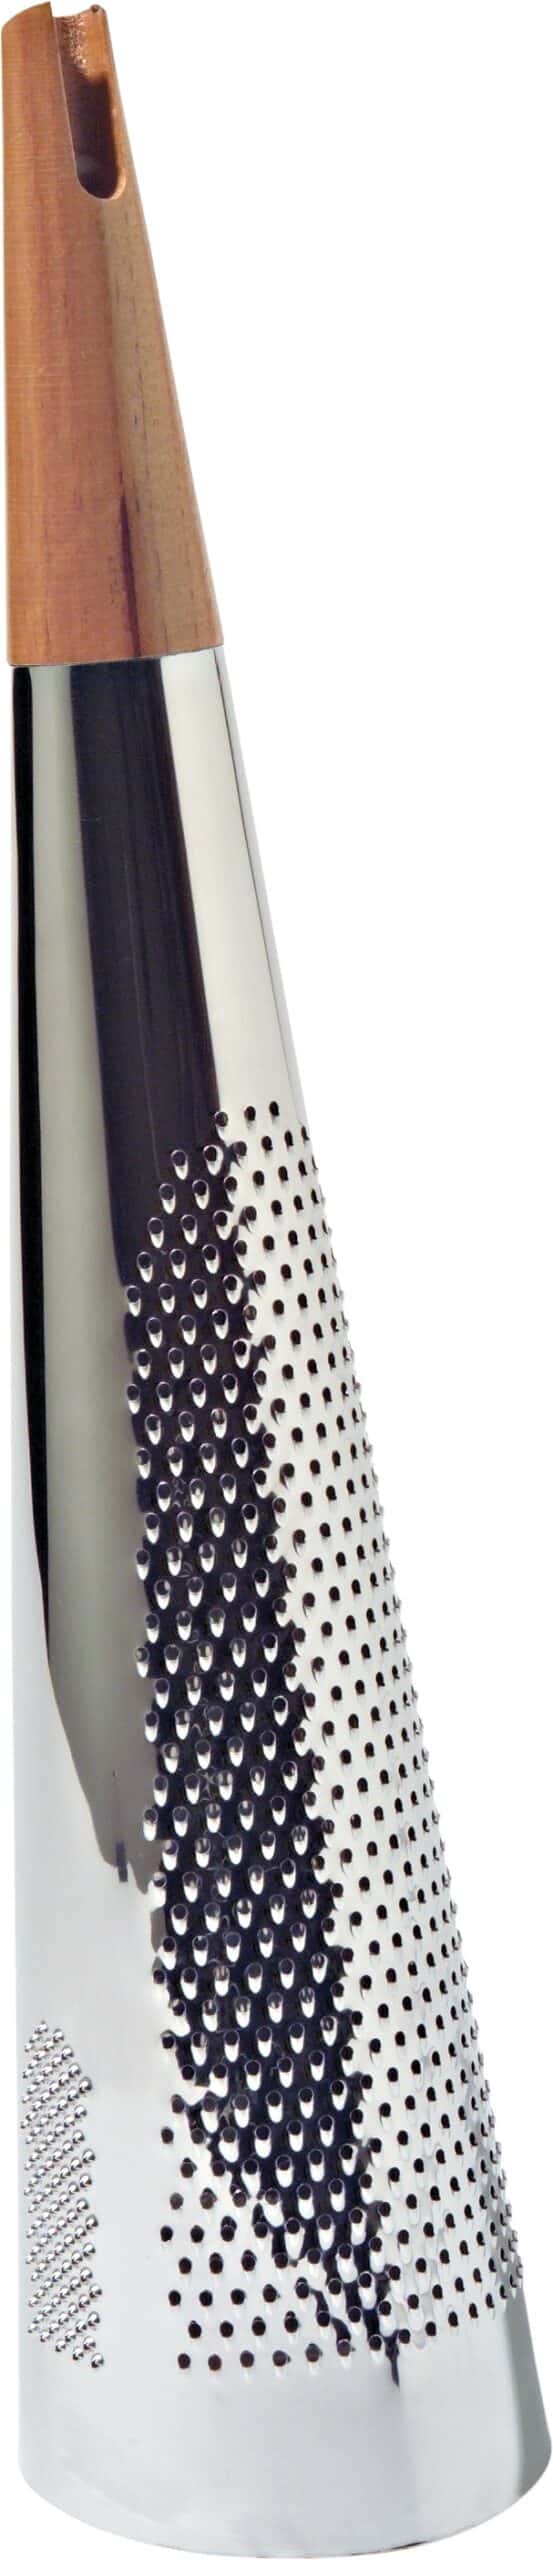 Alessi Cheese Grater Todo